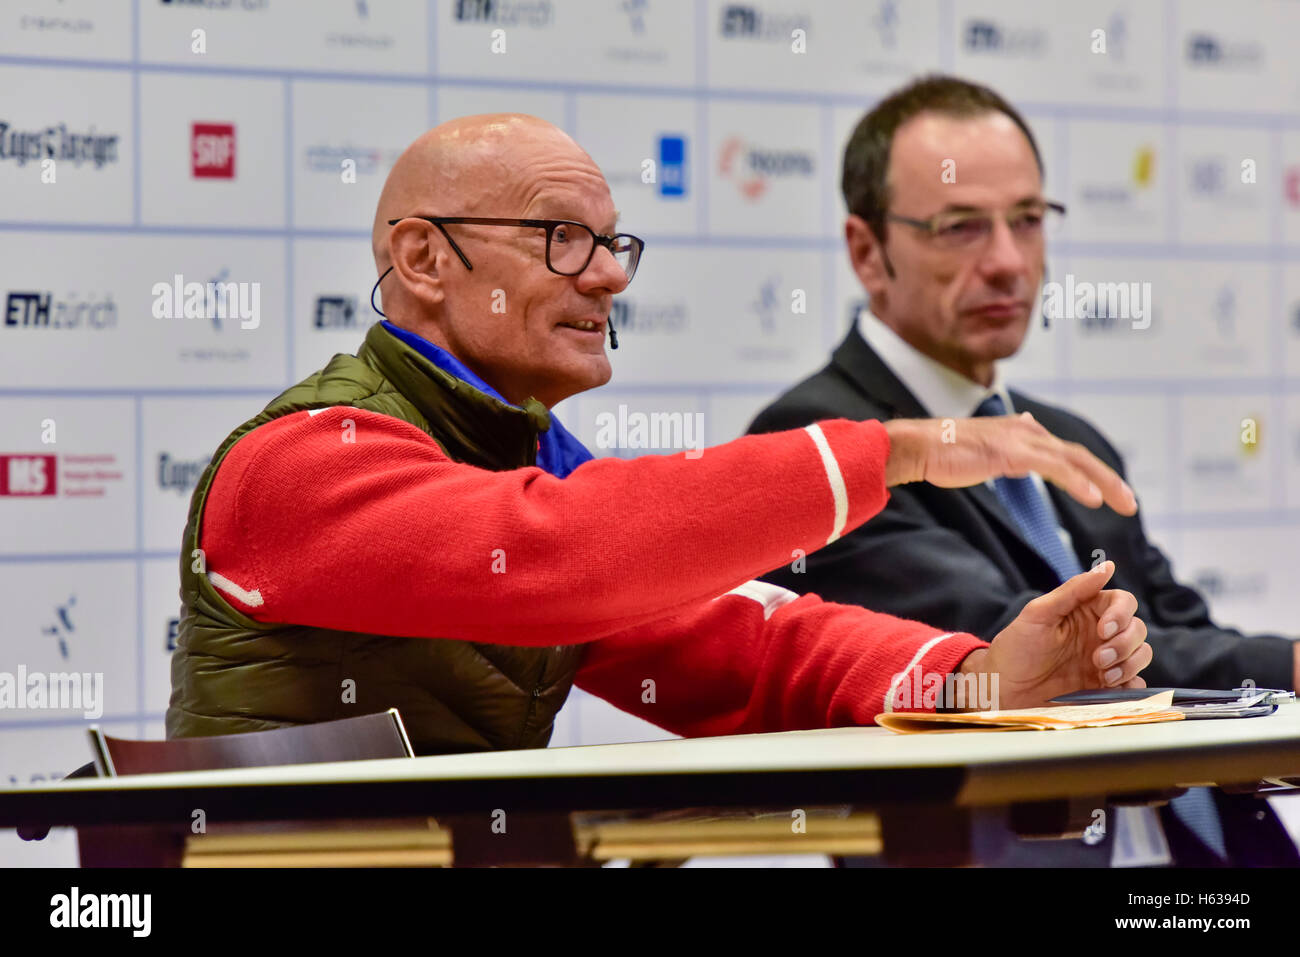 Kloten, Switzerland - 8 October 2016: Heinz Frei (left, Swiss paralympic wheelchair athlete), and Professor Lino Guzella (President of the Swiss Federal Institute of Technology/ETH Zurich) during the opening press conference of Cybathlon, the first championship for racing pilots with disabilities using bionic devices at the Swiss Arena in Kloten (Zurich), Switzerland. Stock Photo